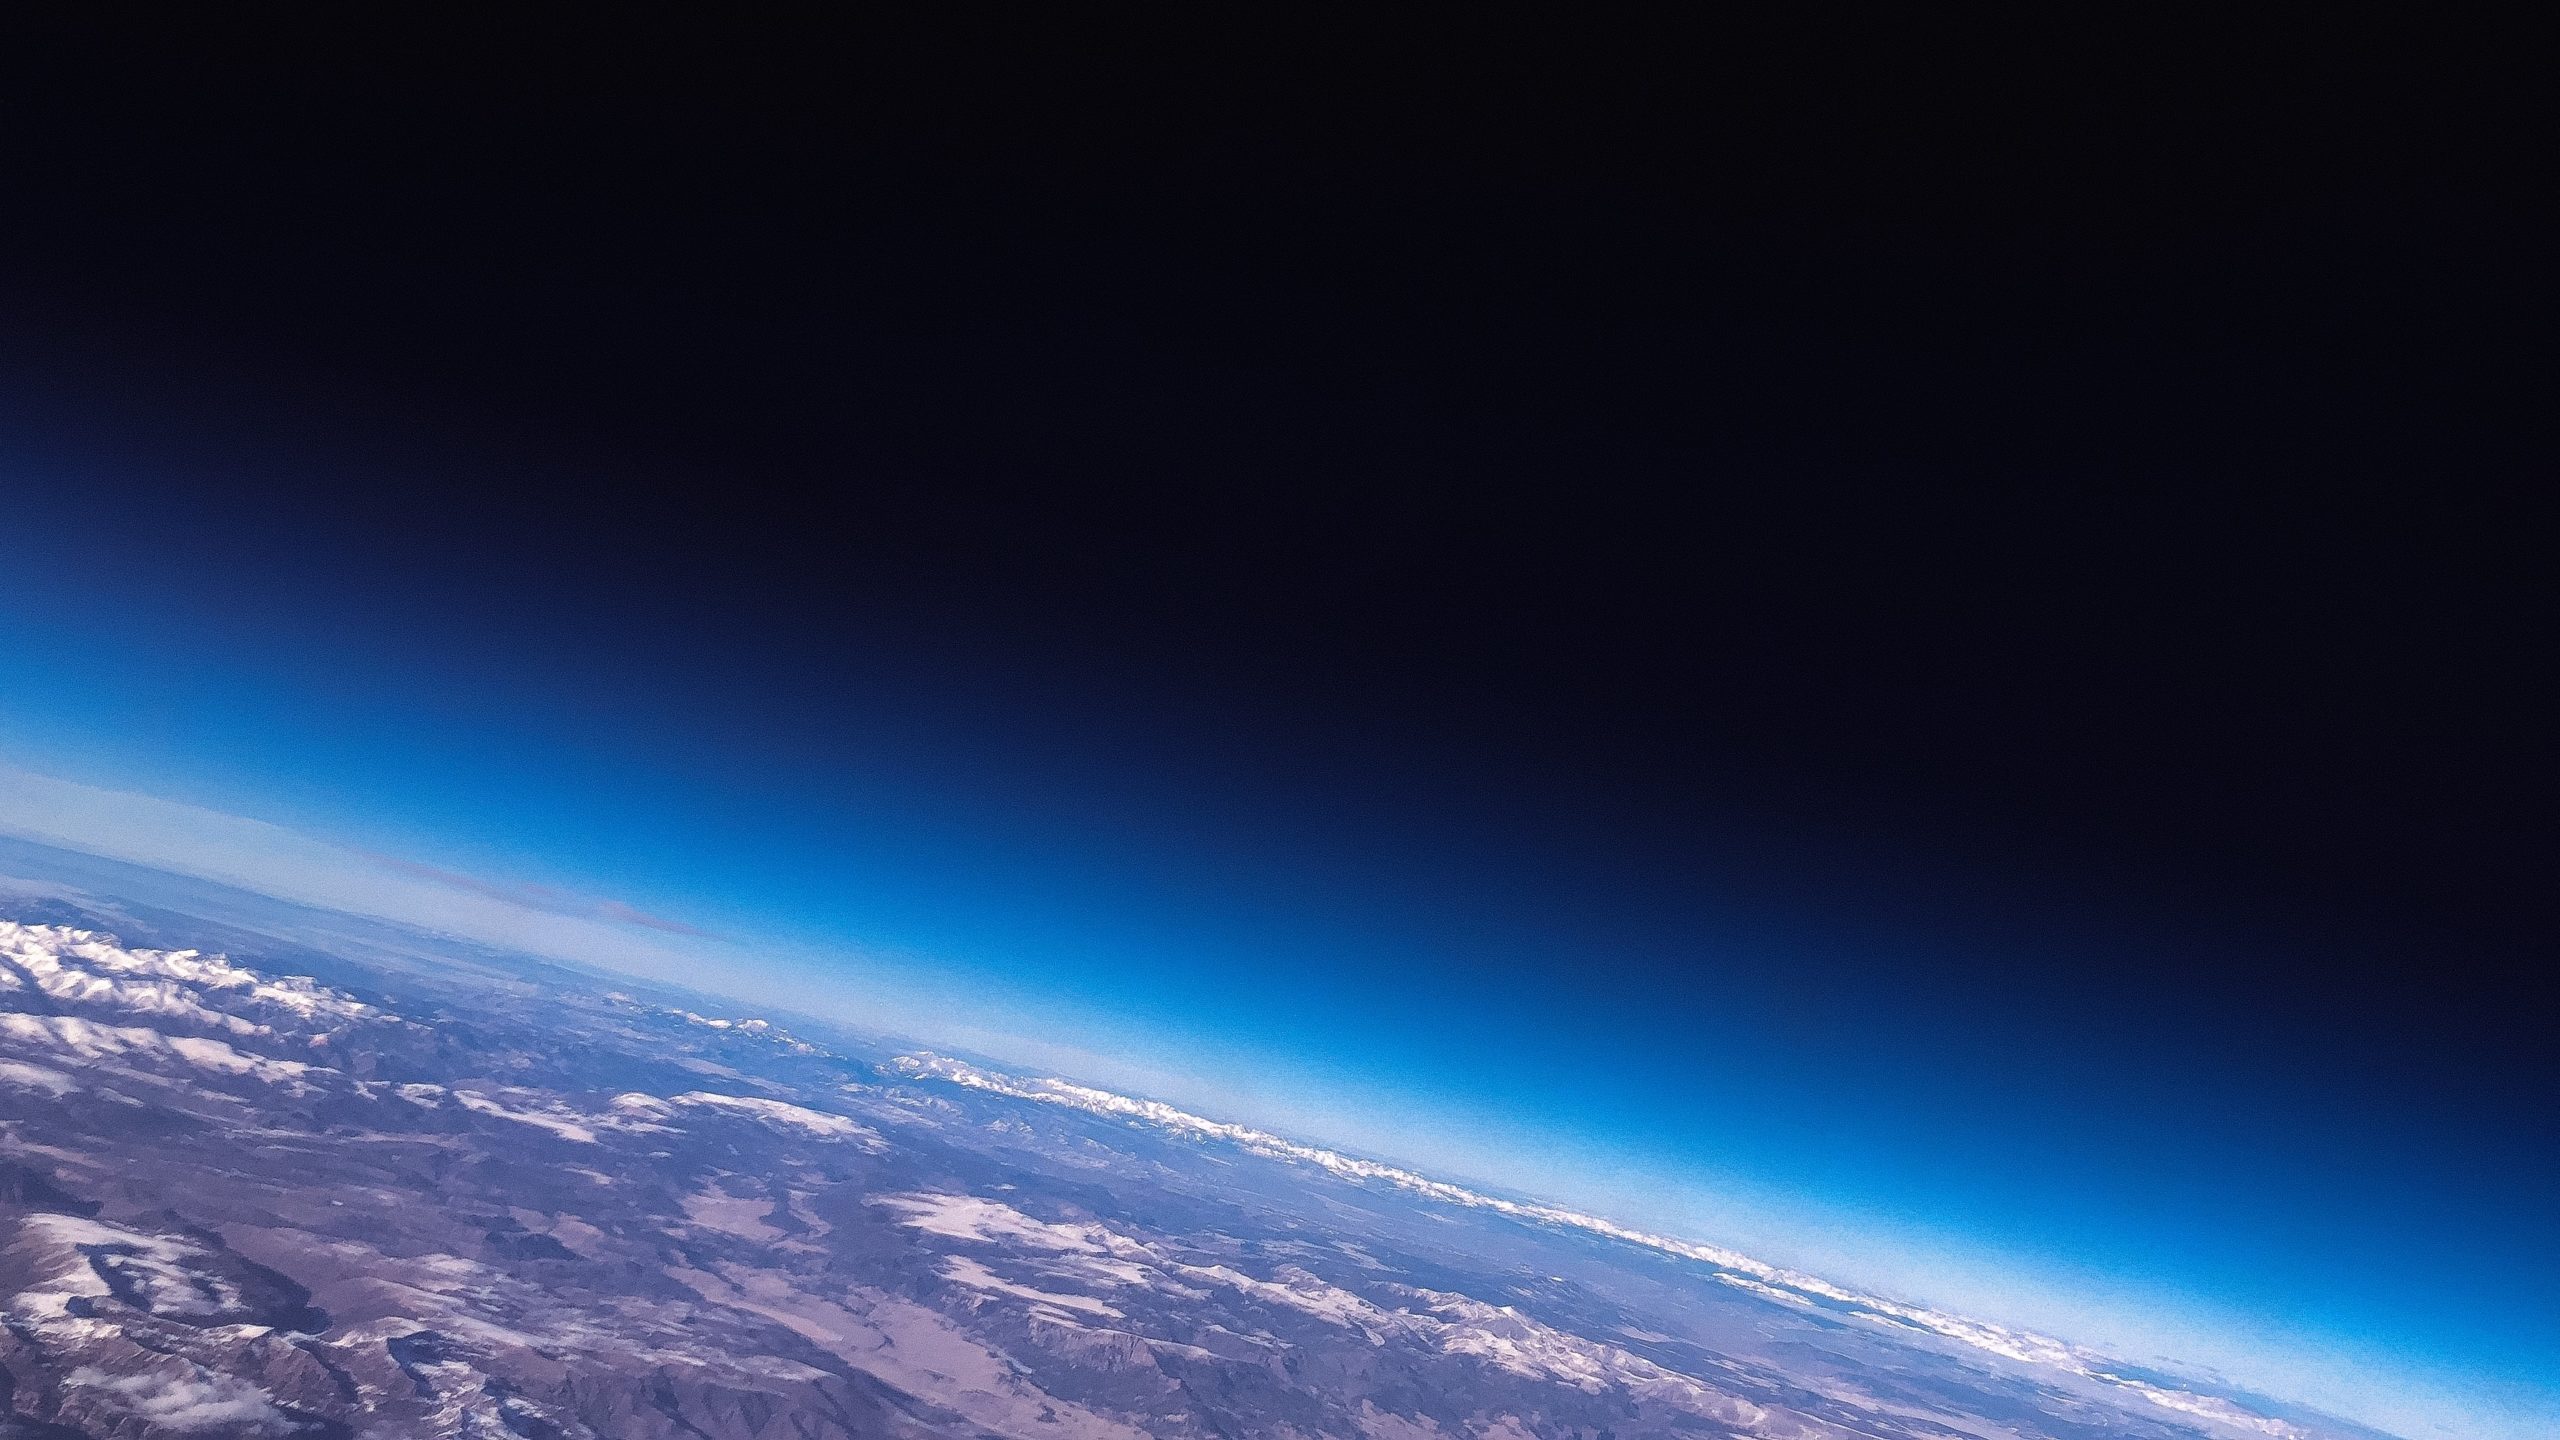 view of the earth's atmosphere from space